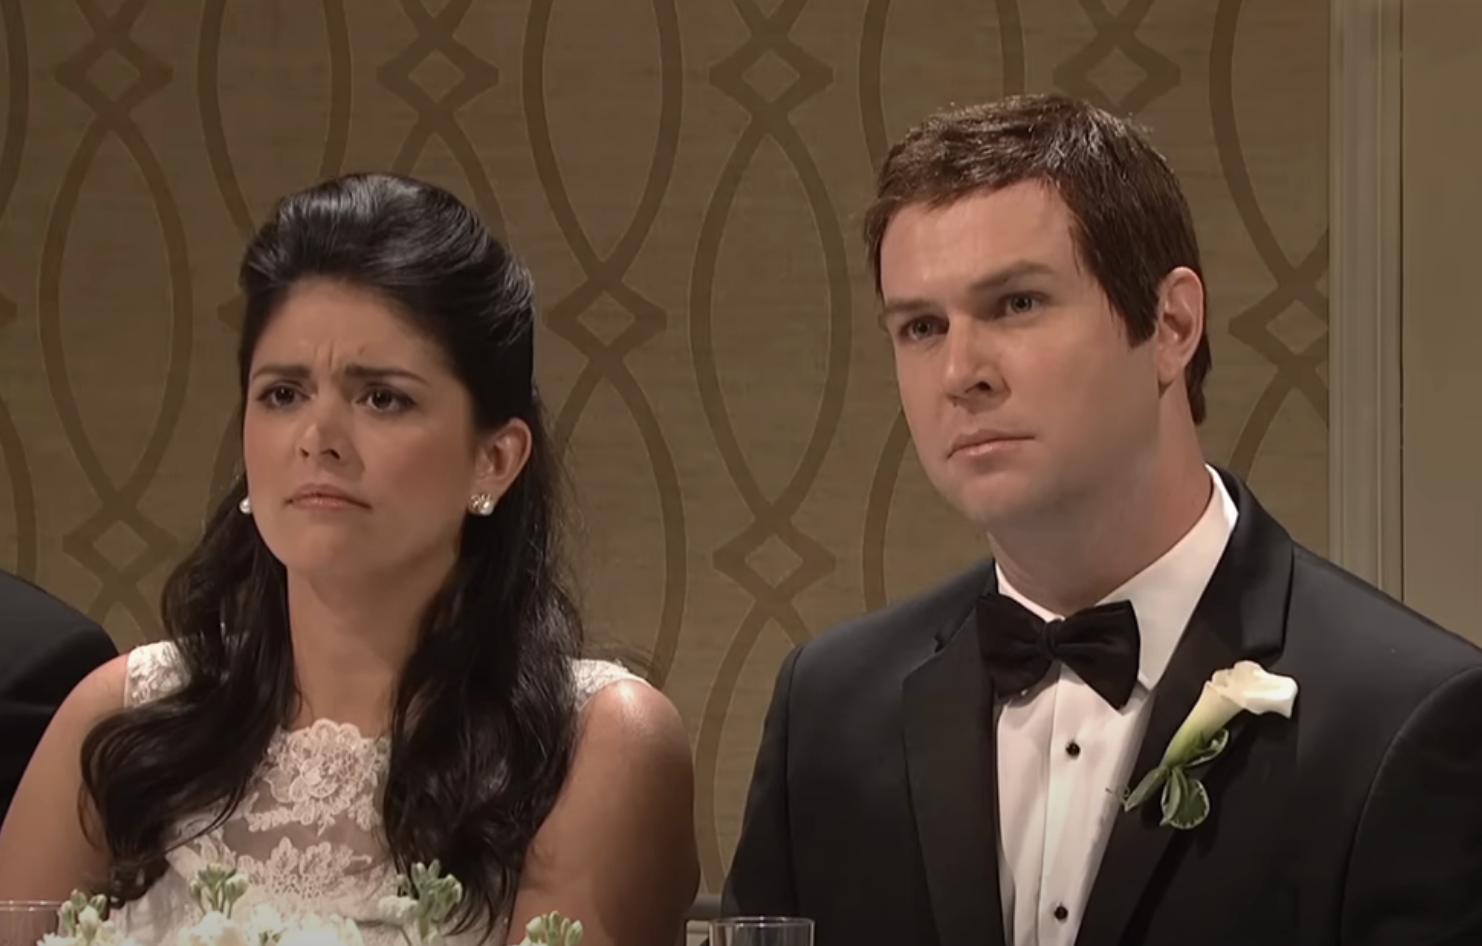 Two characters, a bride and groom, looking displeased at a wedding reception